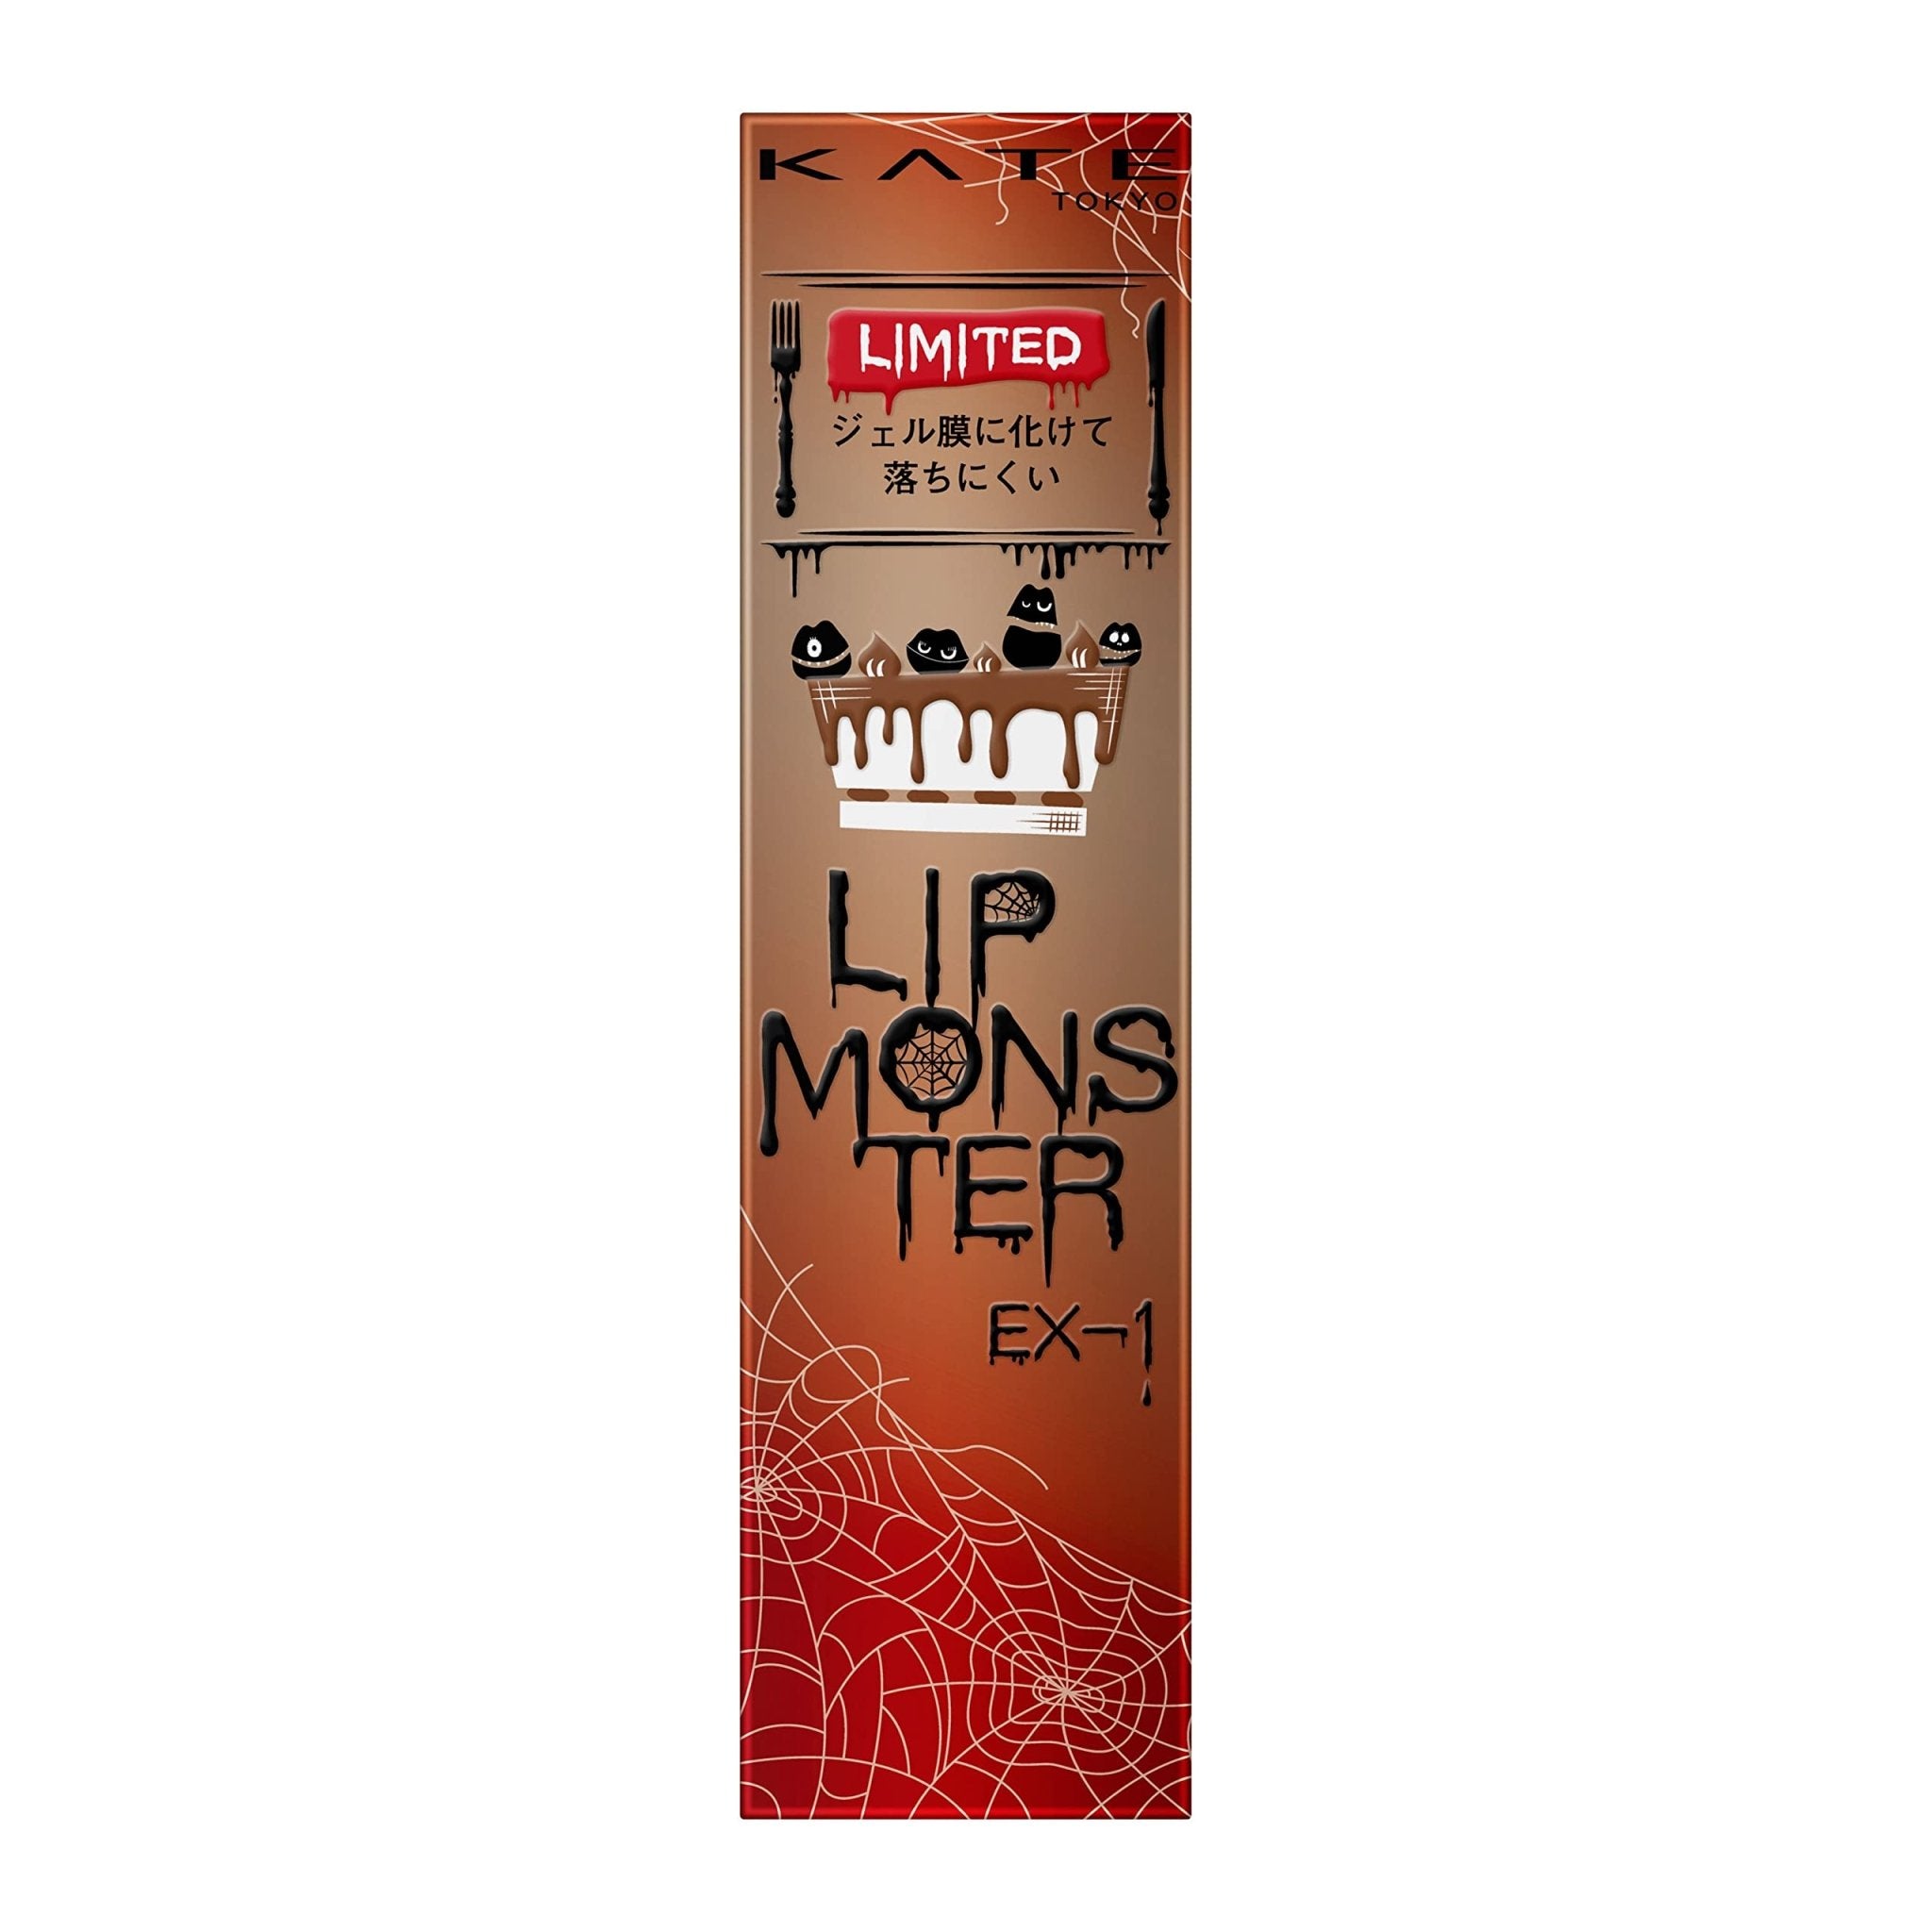 Kate Lip Monster Ex - 1 - Afterglow Of Burnt Tea Leaves - 1 Piece